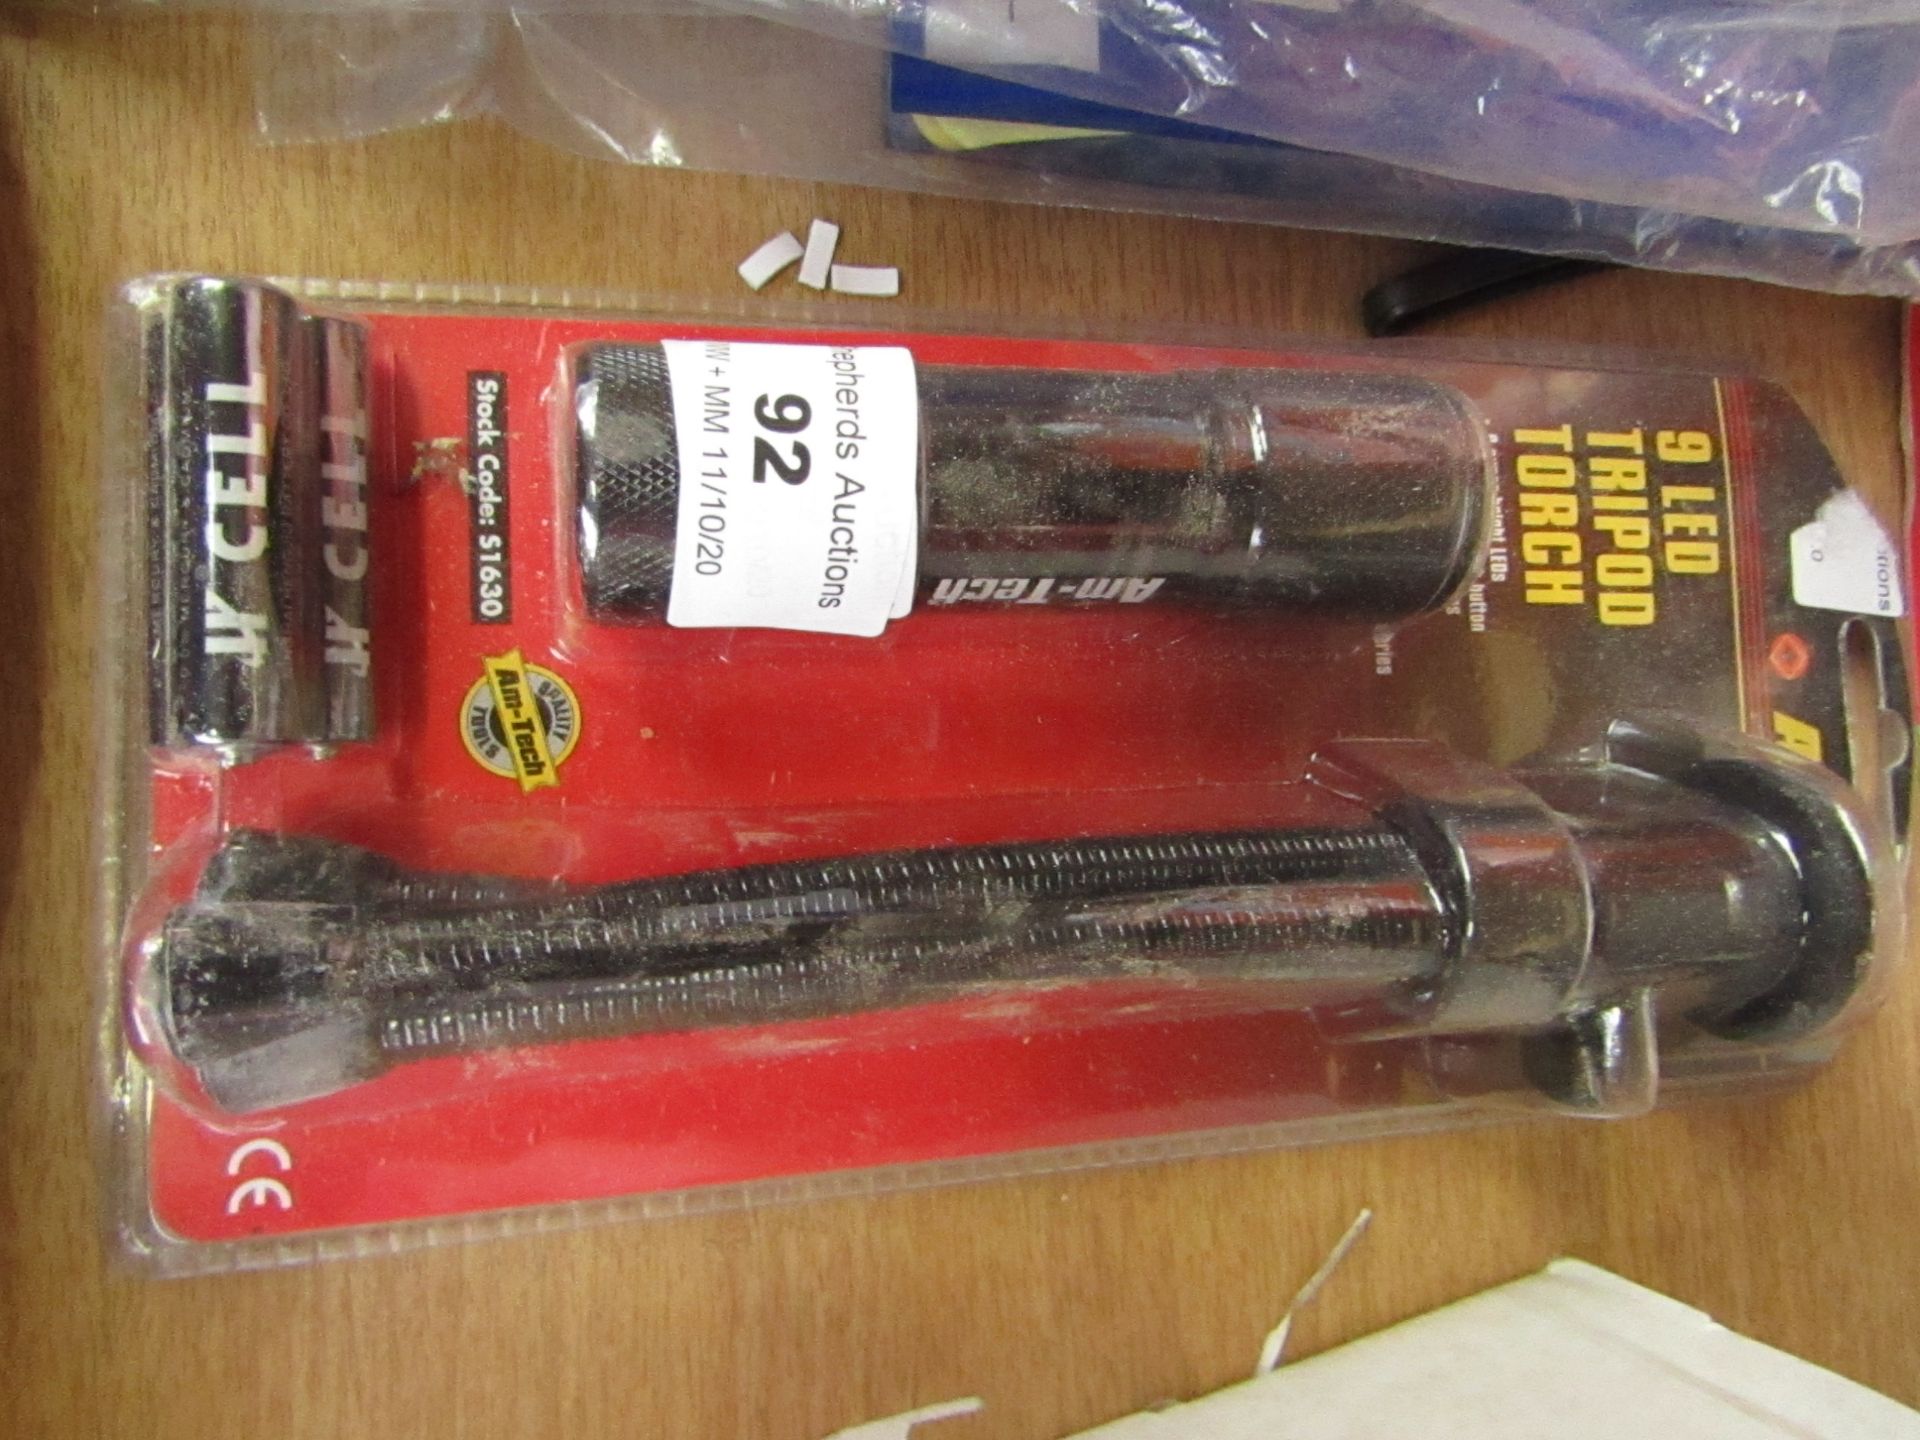 Am-Tech - 9 LED Tripod Torch - New & Packaged.